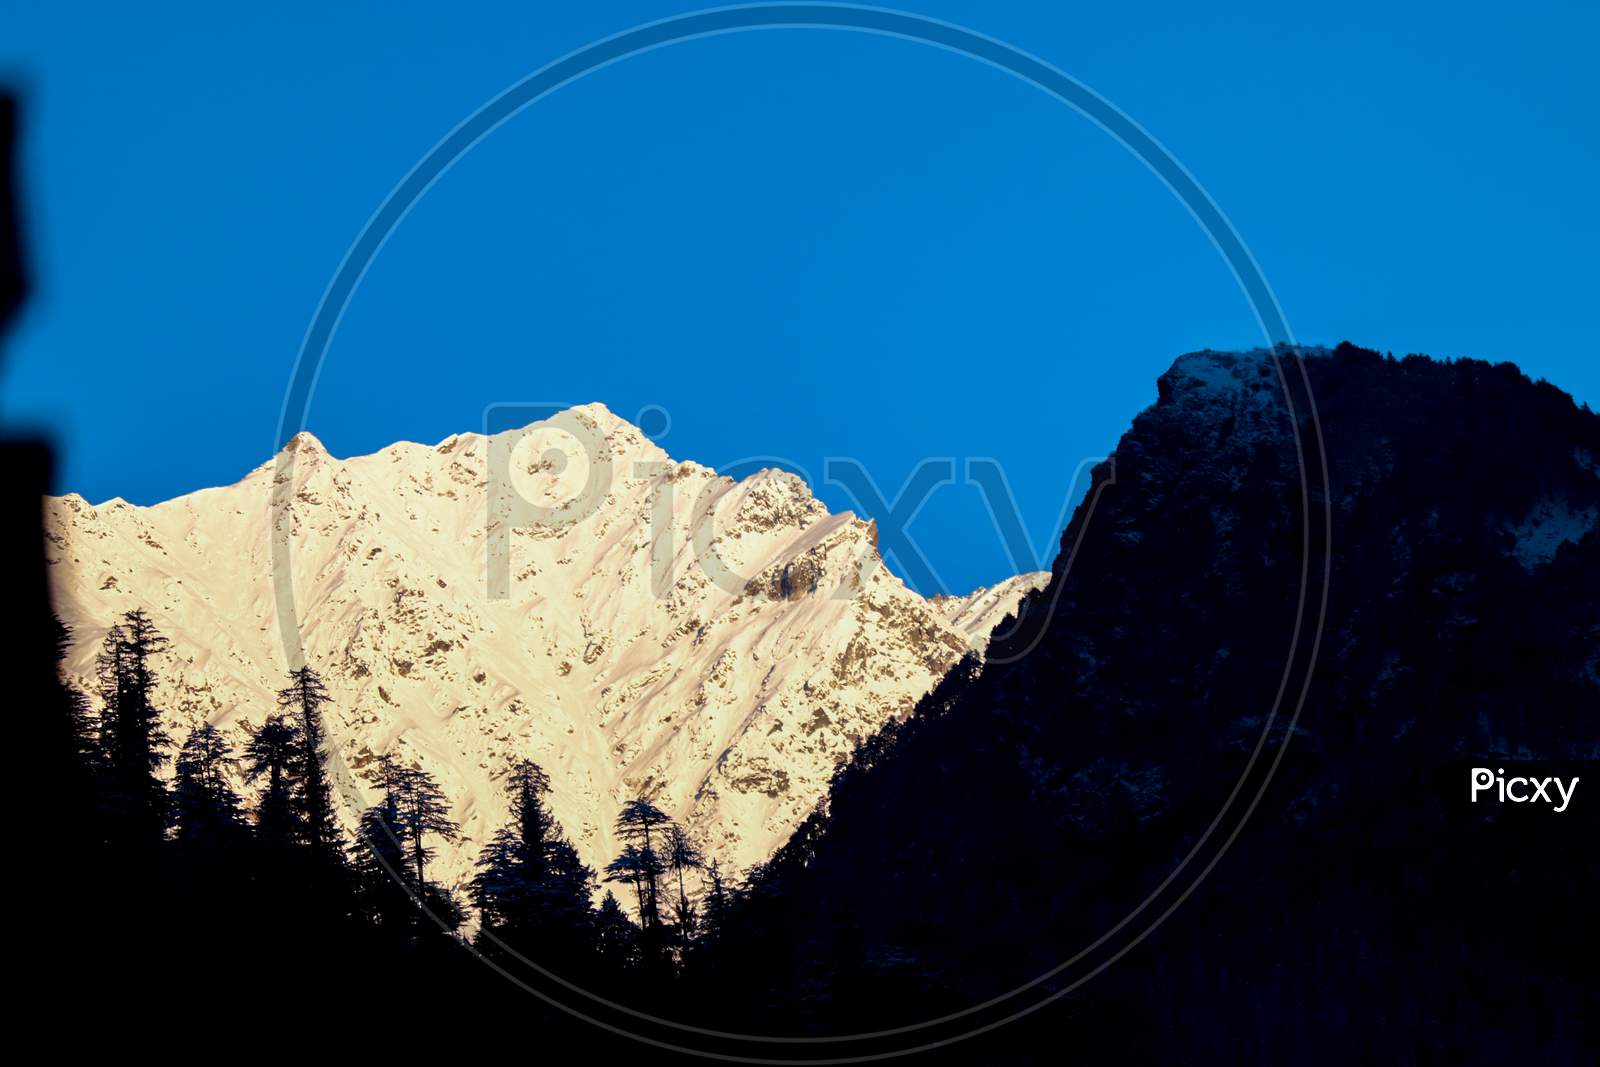 Sunrise On The Snow-Covered Mountain. The Mountain In The Front Is Covered With Pine Trees.